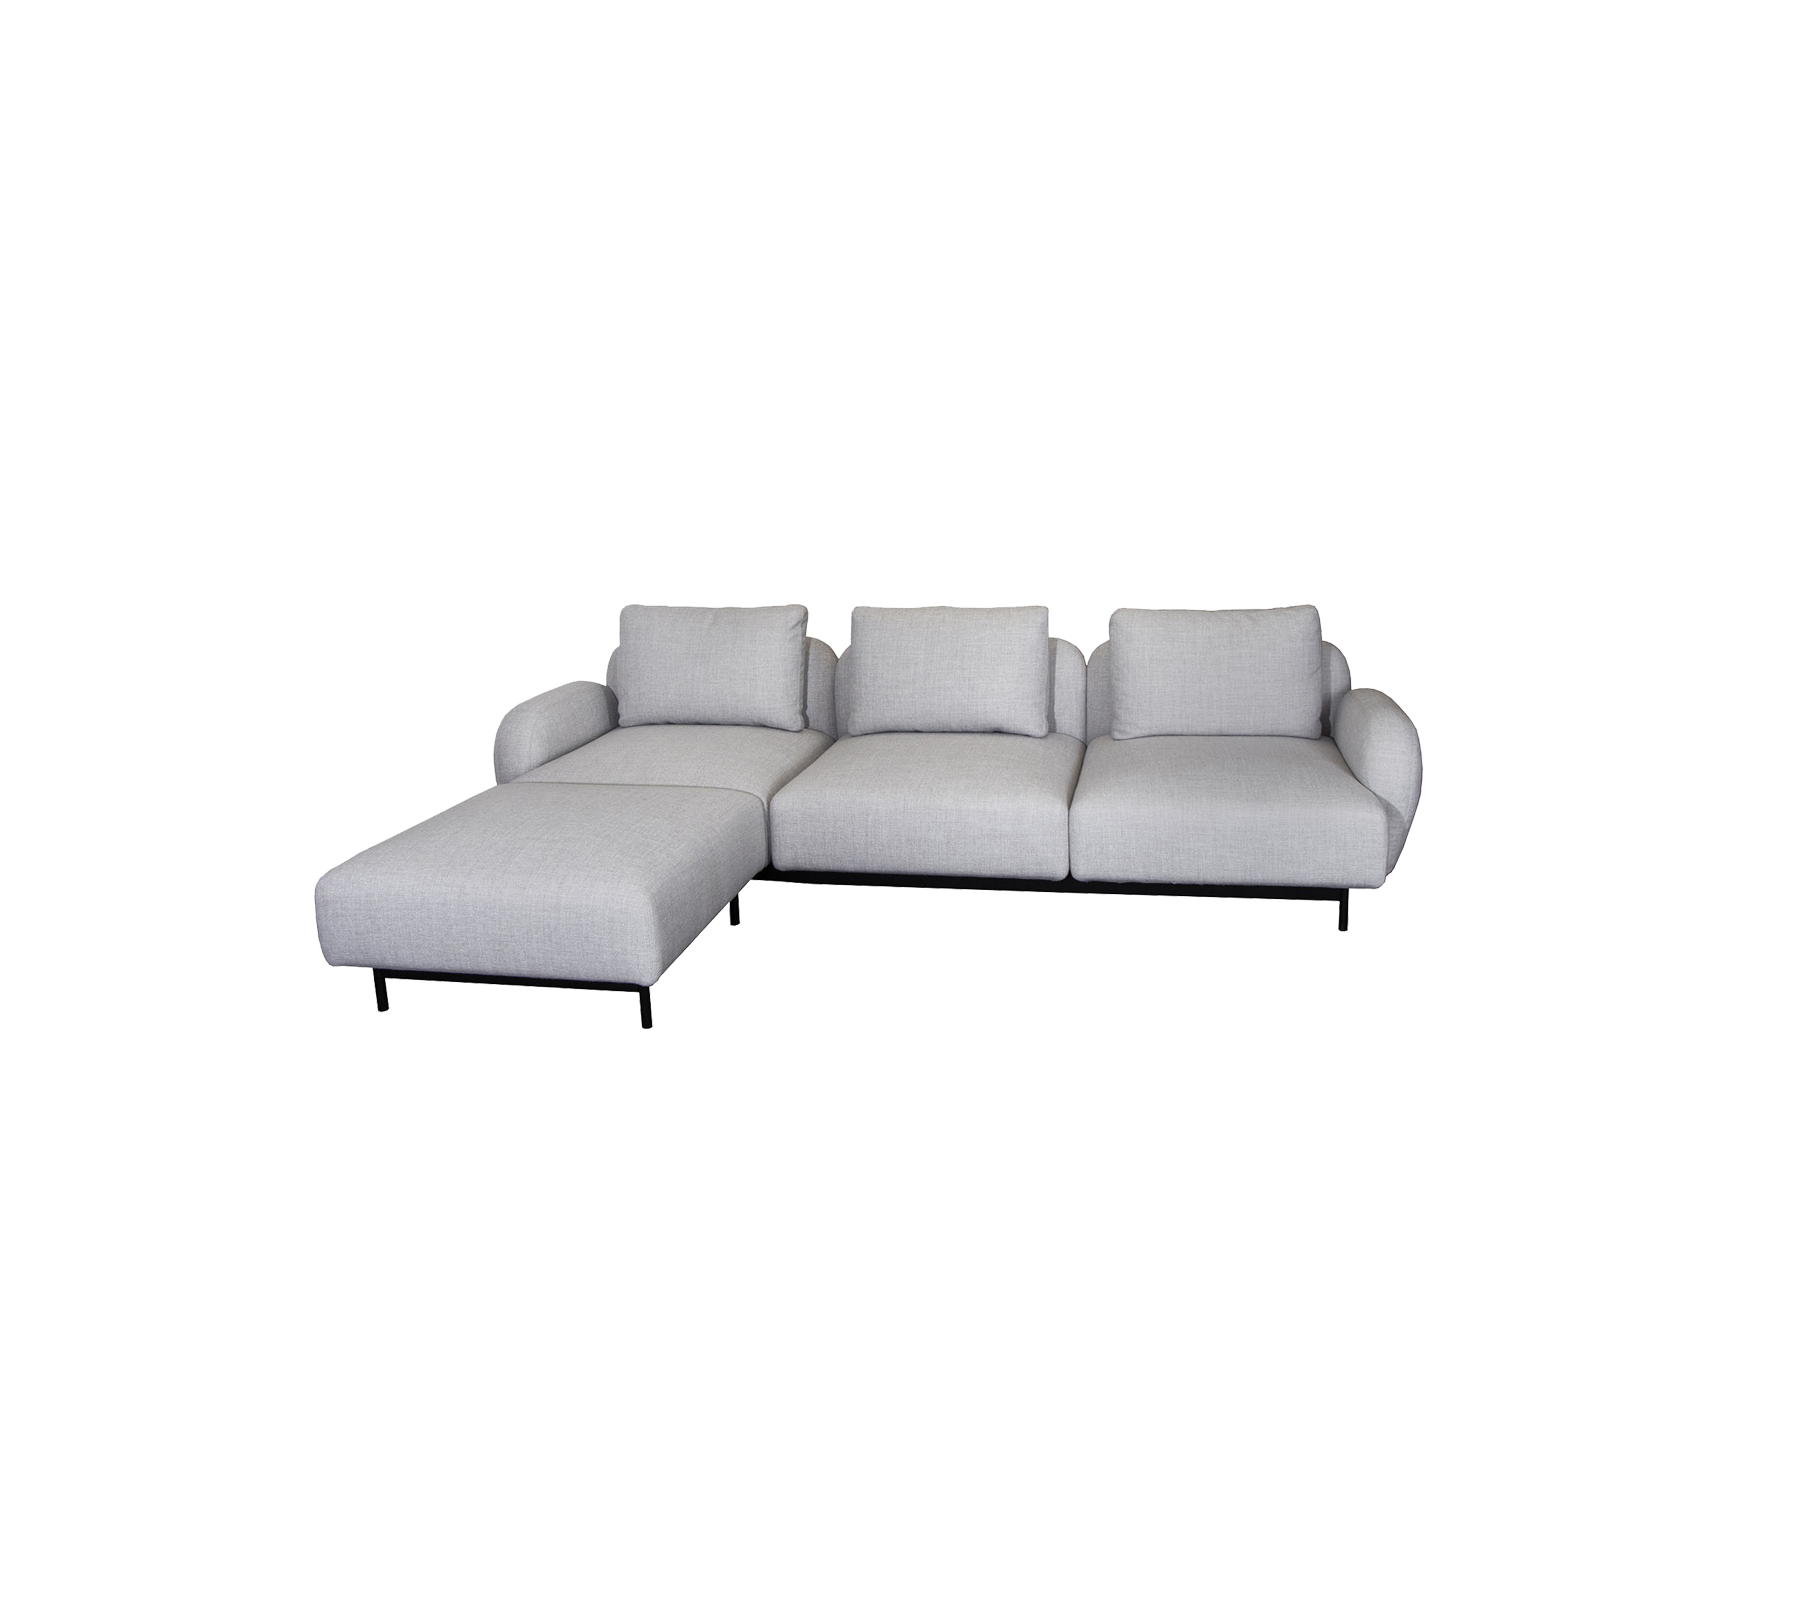 Aura 3-persoonsbank met lage armleuning & chaise longue, recht (2)